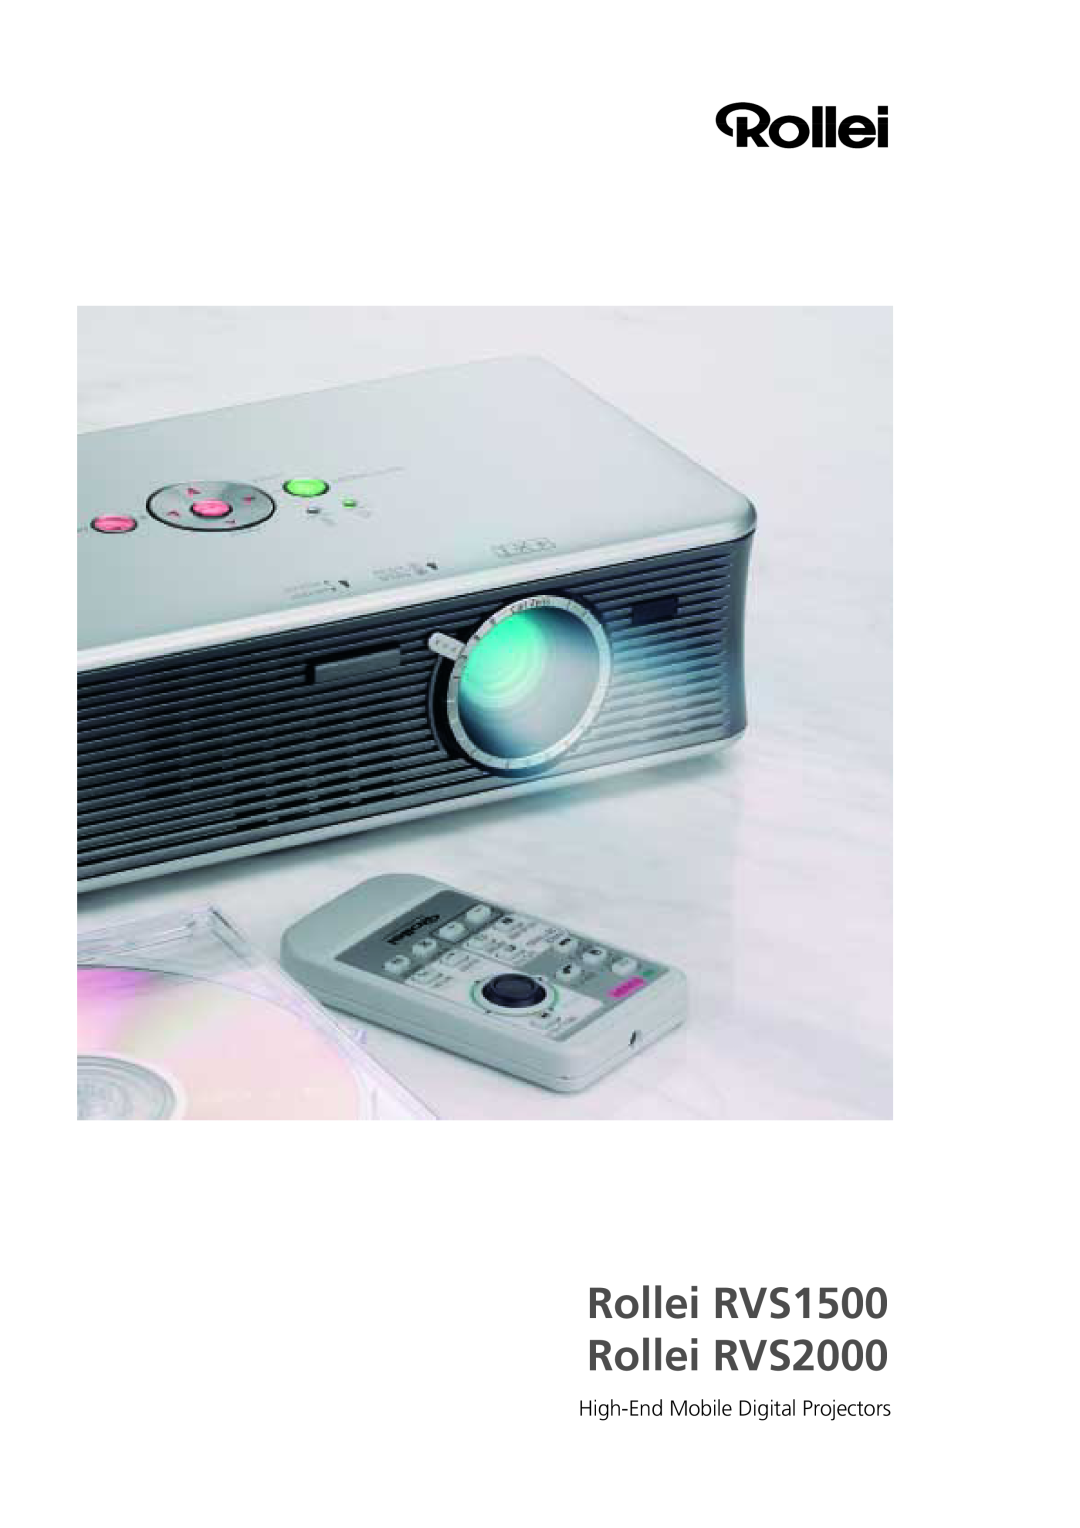 Rollei manual Rollei RVS1500 Rollei RVS2000, High-End Mobile Digital Projectors 